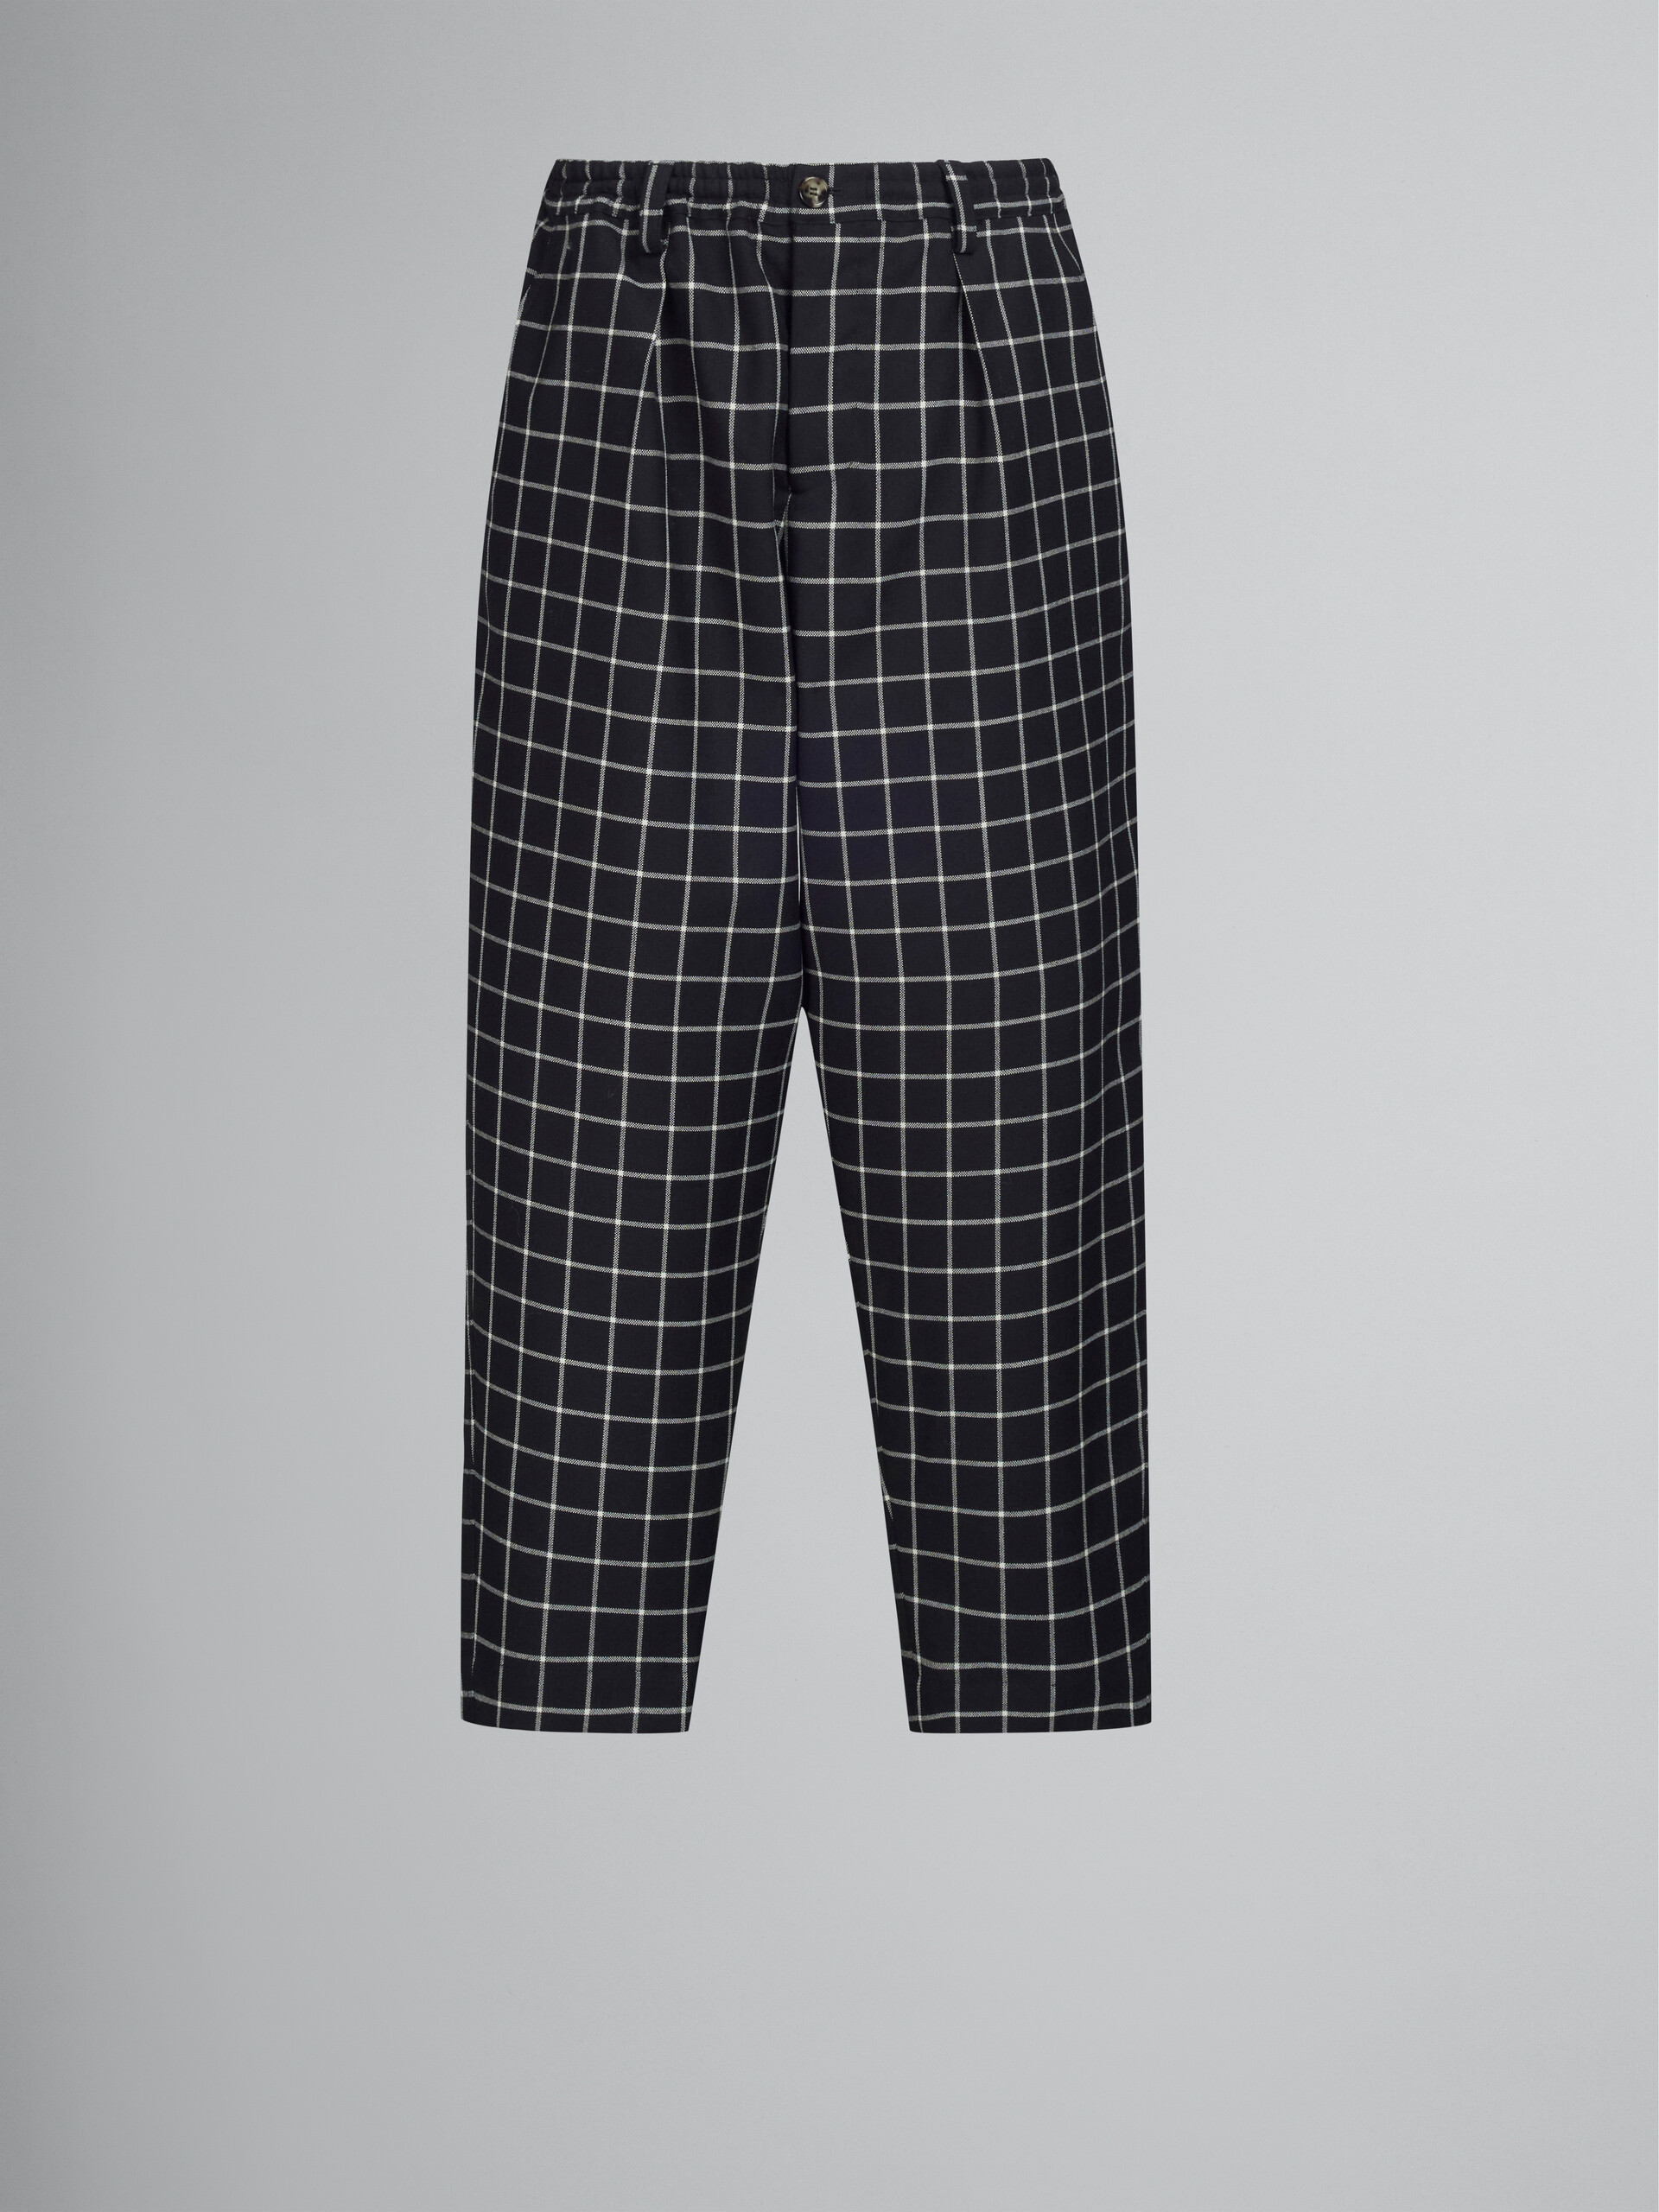 Black checked wool trousers - Pants - Image 1